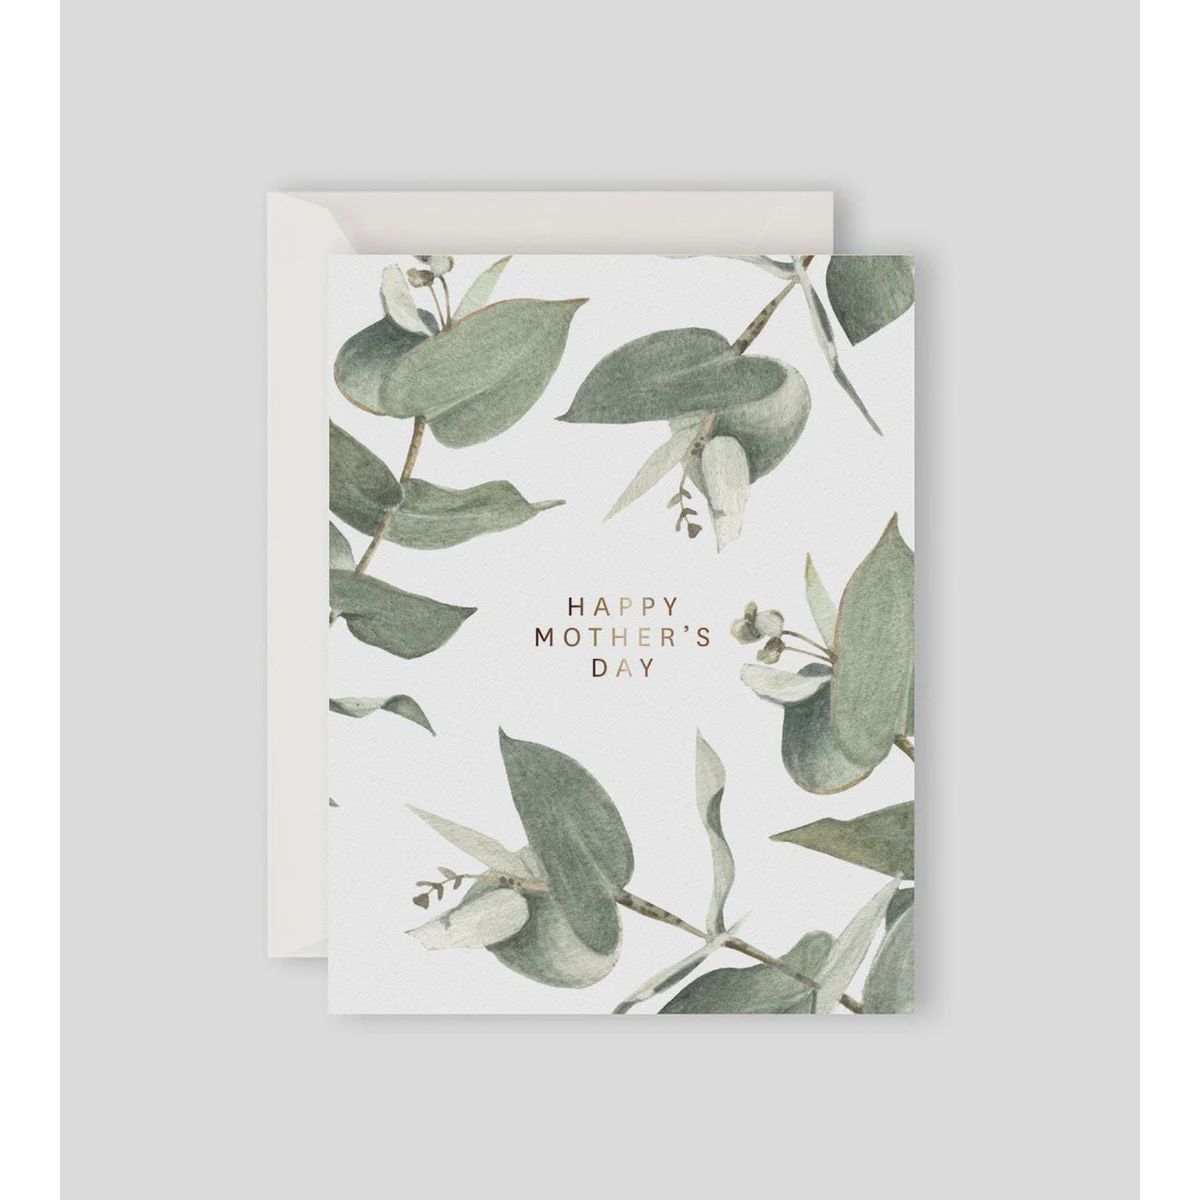 Father Rabbit Stationery - Eucalyptus Happy Mother's Day - Urban Naturals